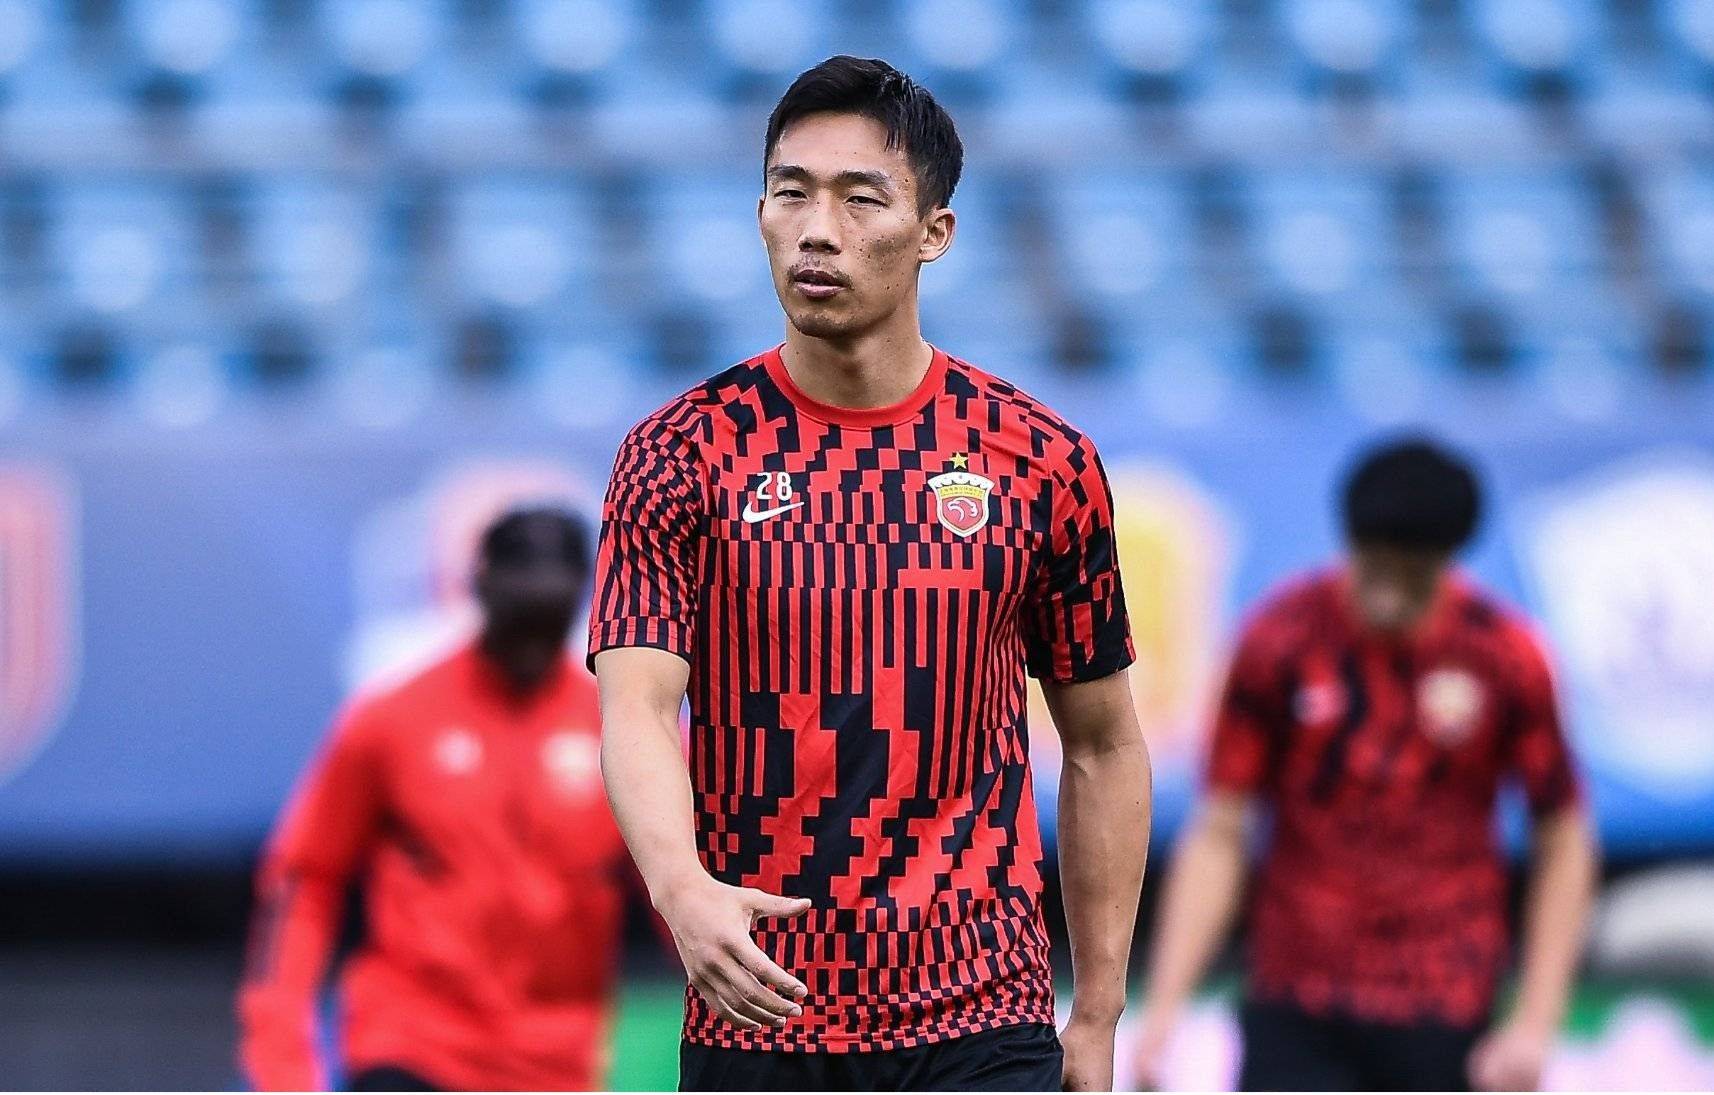 Sports Journalist: It's Very Likely that He Guan Will Leave Shanghai Port, Loan Move Could Be a Good Attempt